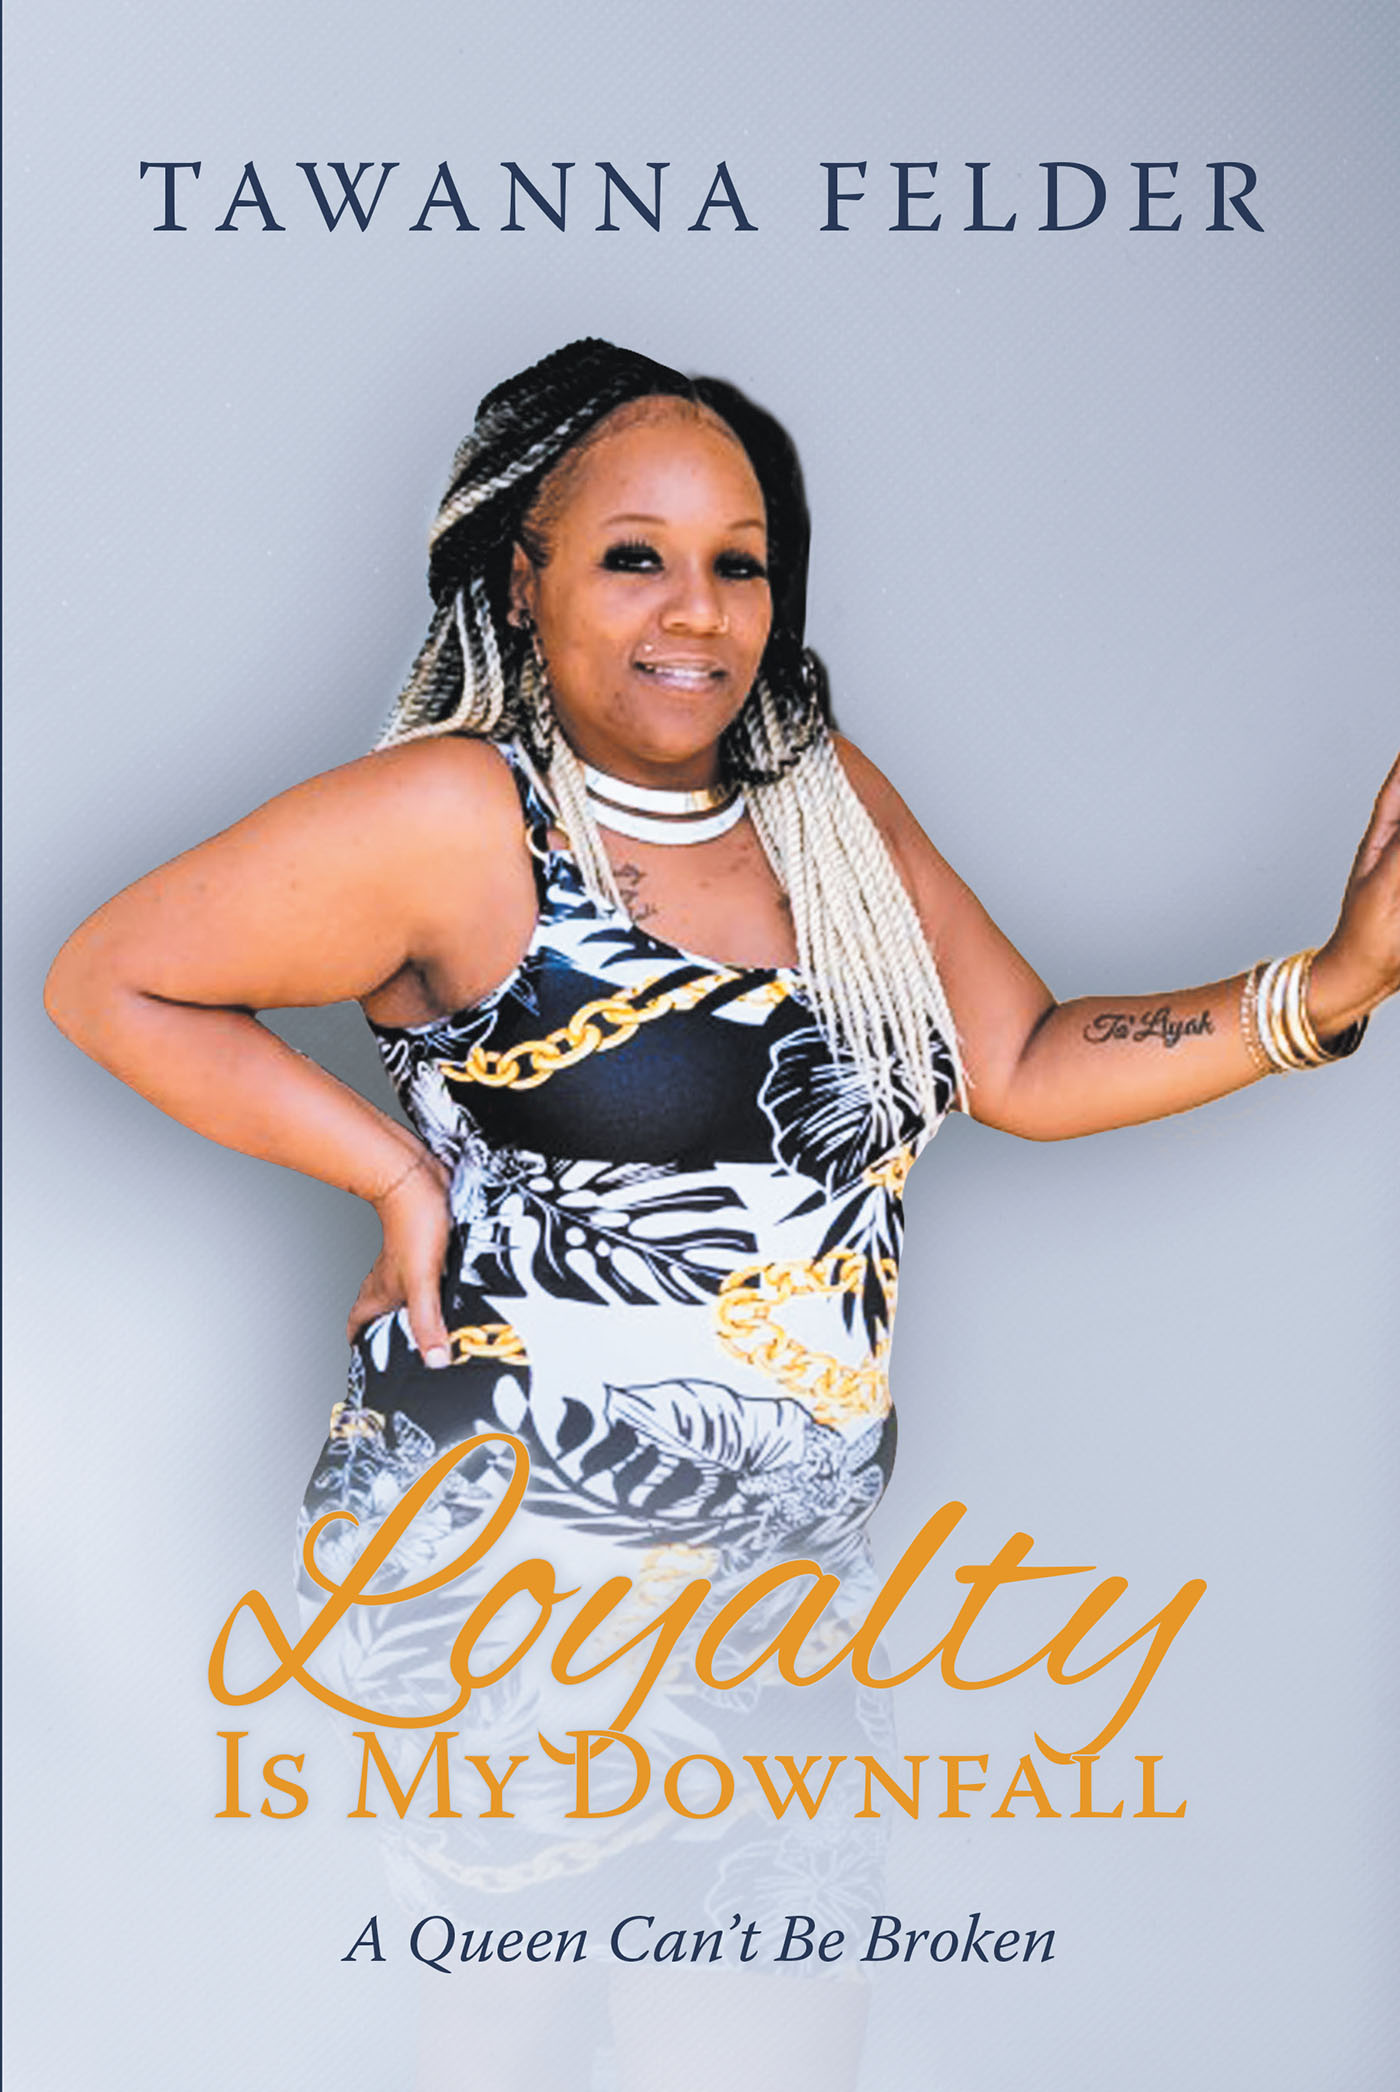 Author Tawanna Felder’s New Book, "Loyalty is My Downfall: A Queen Can't Be Broken," is an Empowering Memoir That Shares the Story of a Remarkable Life